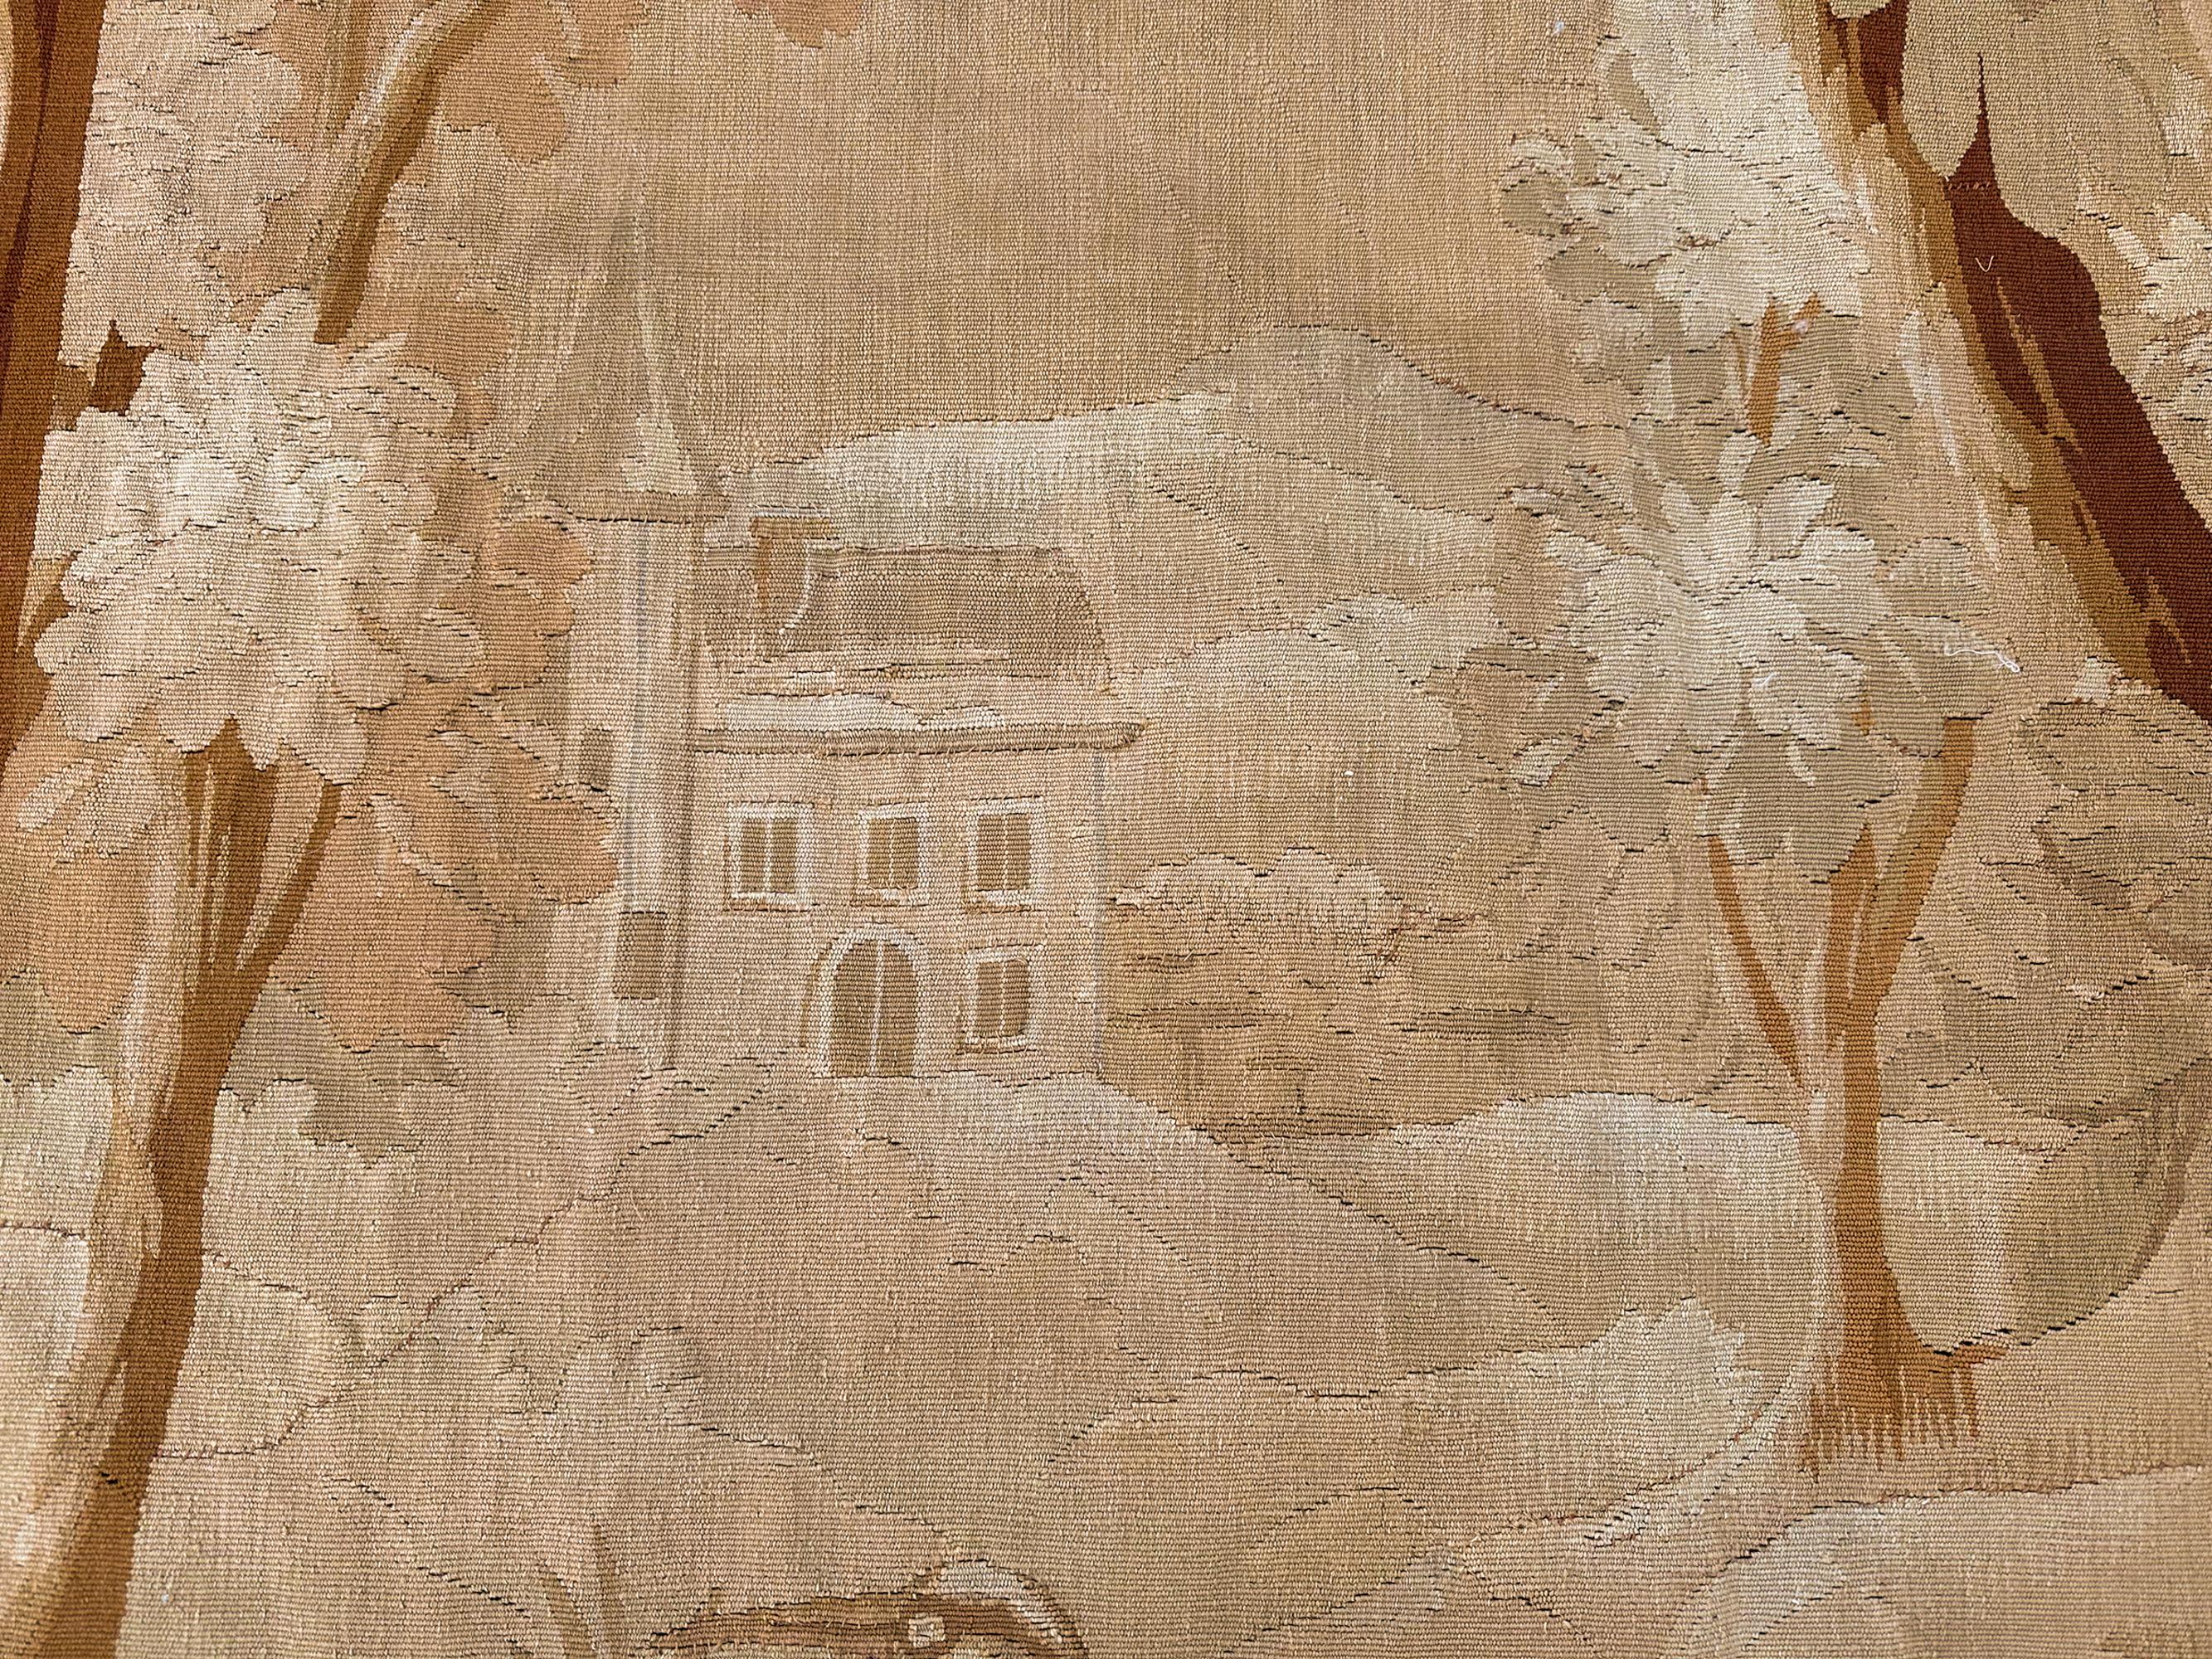 Antique French Aubusson Tapestry Birds Wool & Silk Large 5x9ft 148x280cm 1900 For Sale 5